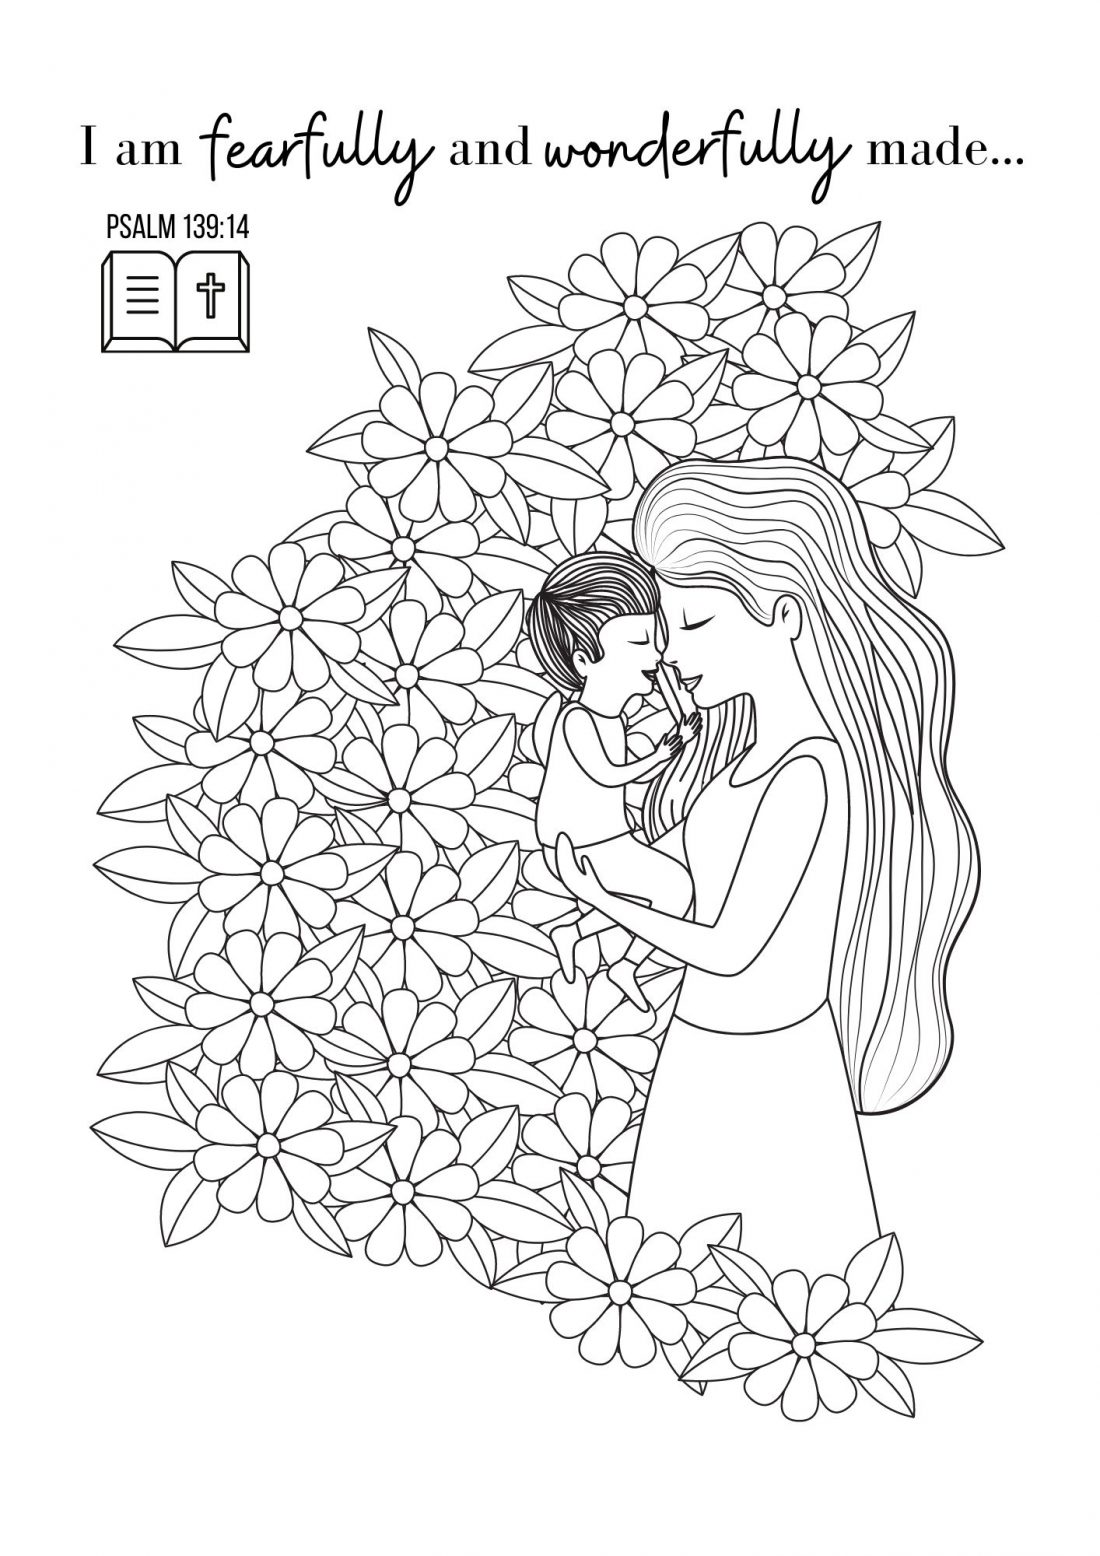 Fearfully and Wonderfully Made Bible Coloring Page (Mother and Son) Scripture focus: "I am fearfully and wonderfully made..." Psalm 139:14